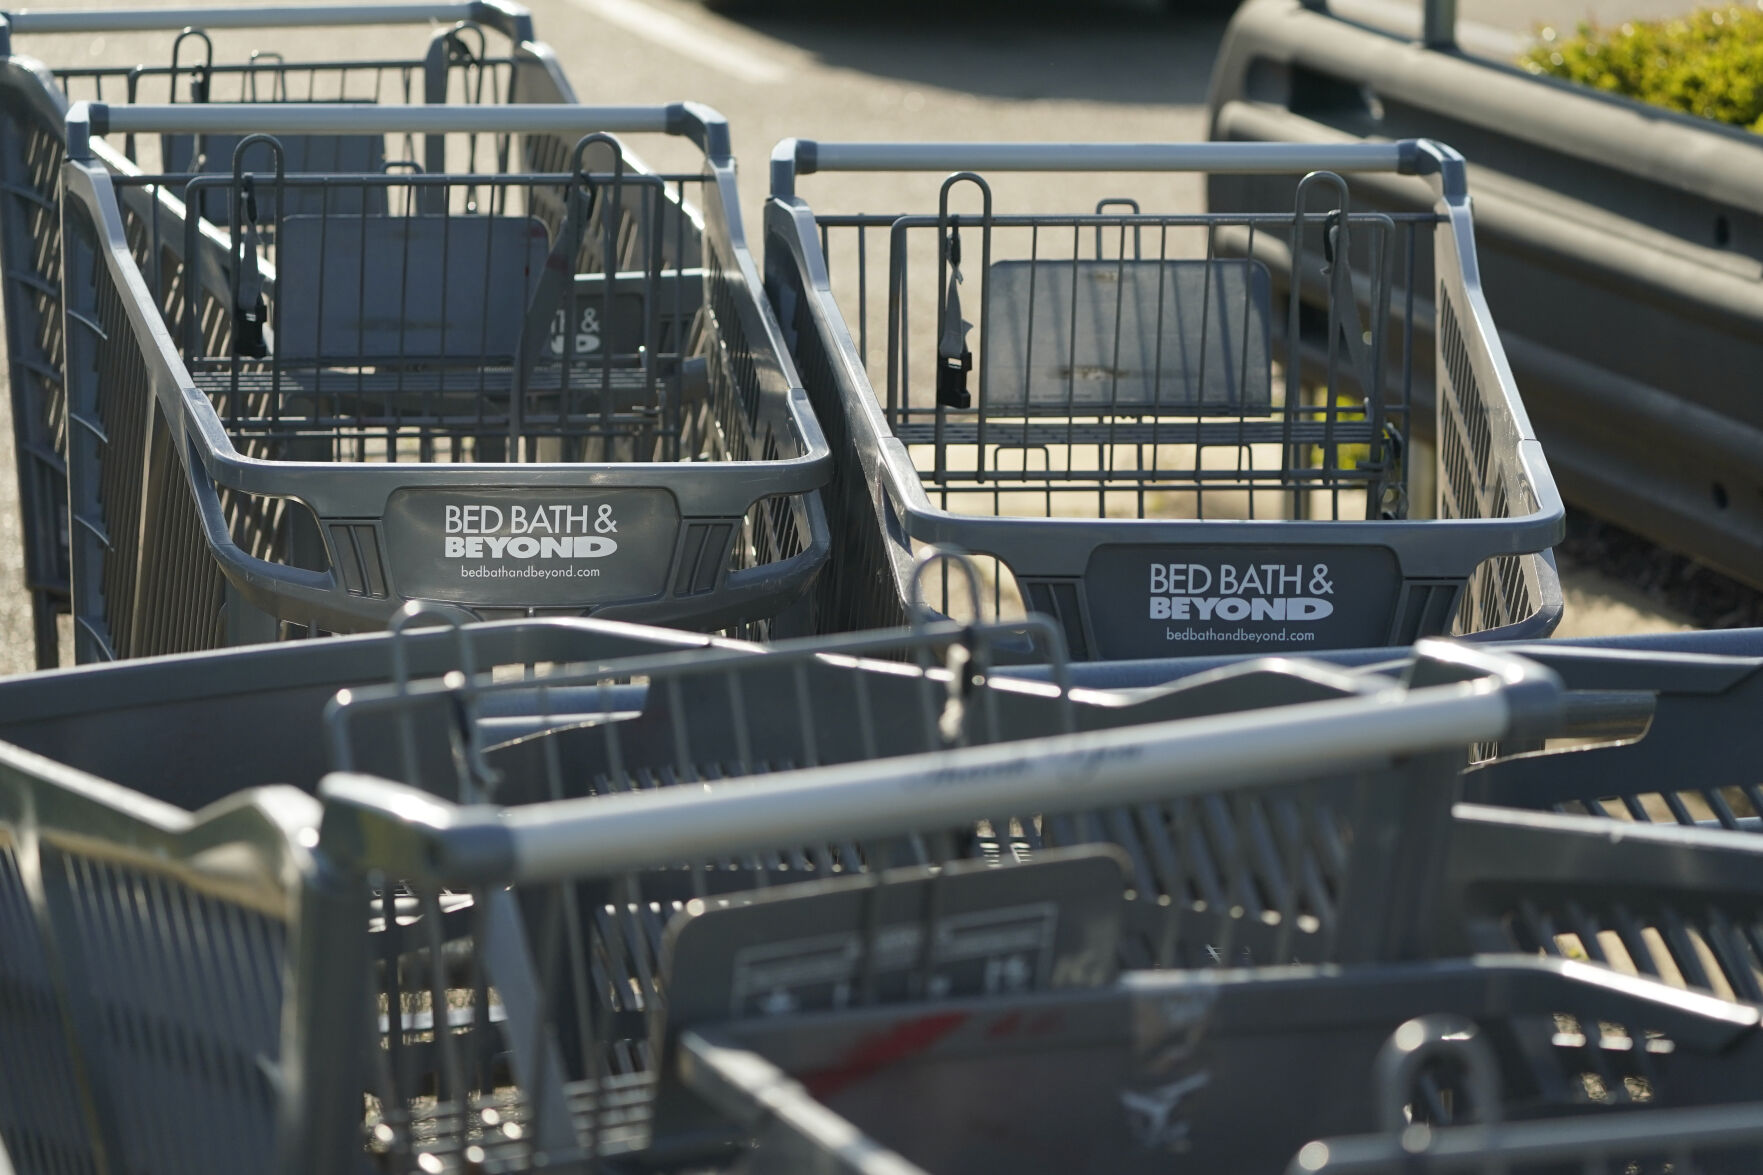 <p>Bed Bath & Beyond shopping carts are left in a corral in Flowood, Miss., on Monday, April 24, 2023. One of the original big box retailers, the company filed for bankruptcy protection on Sunday, April 23, following years of dismal sales and losses. (AP Photo/Rogelio V. Solis)</p>   PHOTO CREDIT: Rogelio V. Solis 